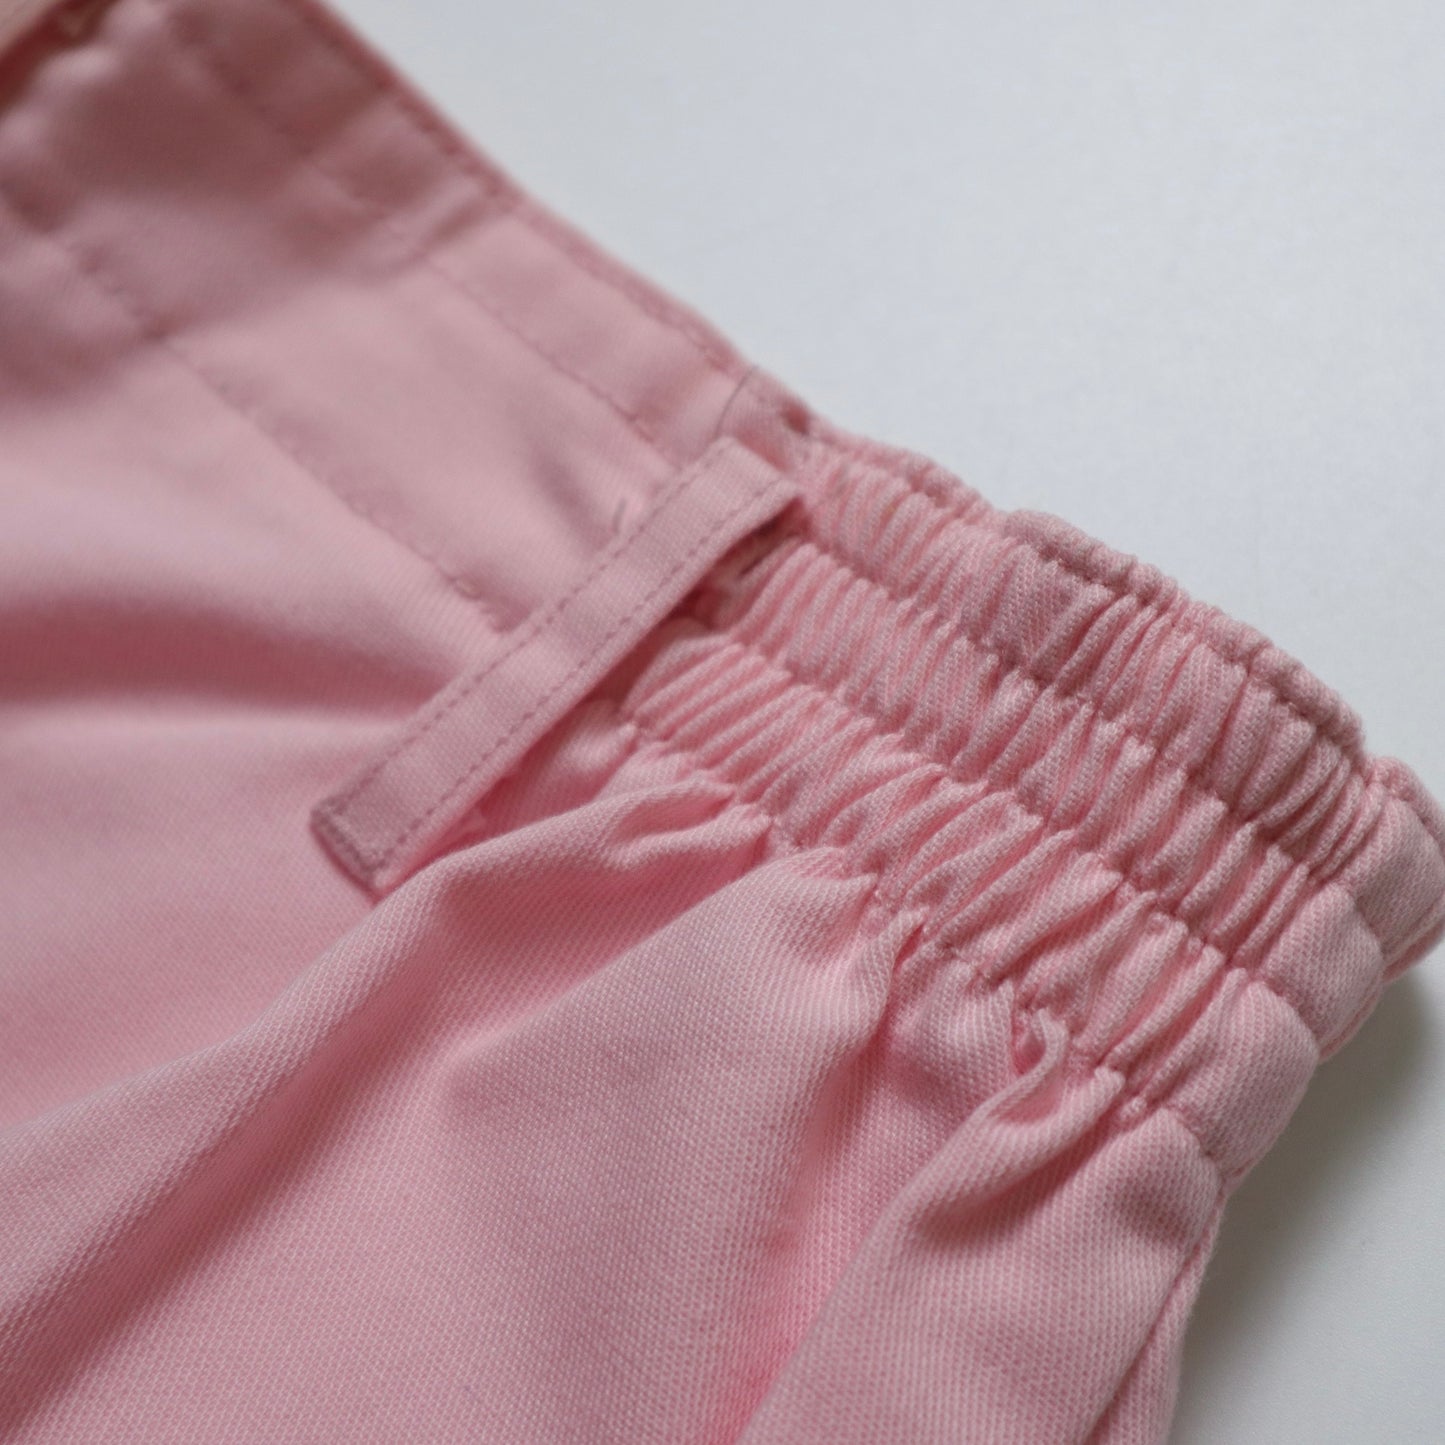 1980s Levi's American-made pink plain discount shorts